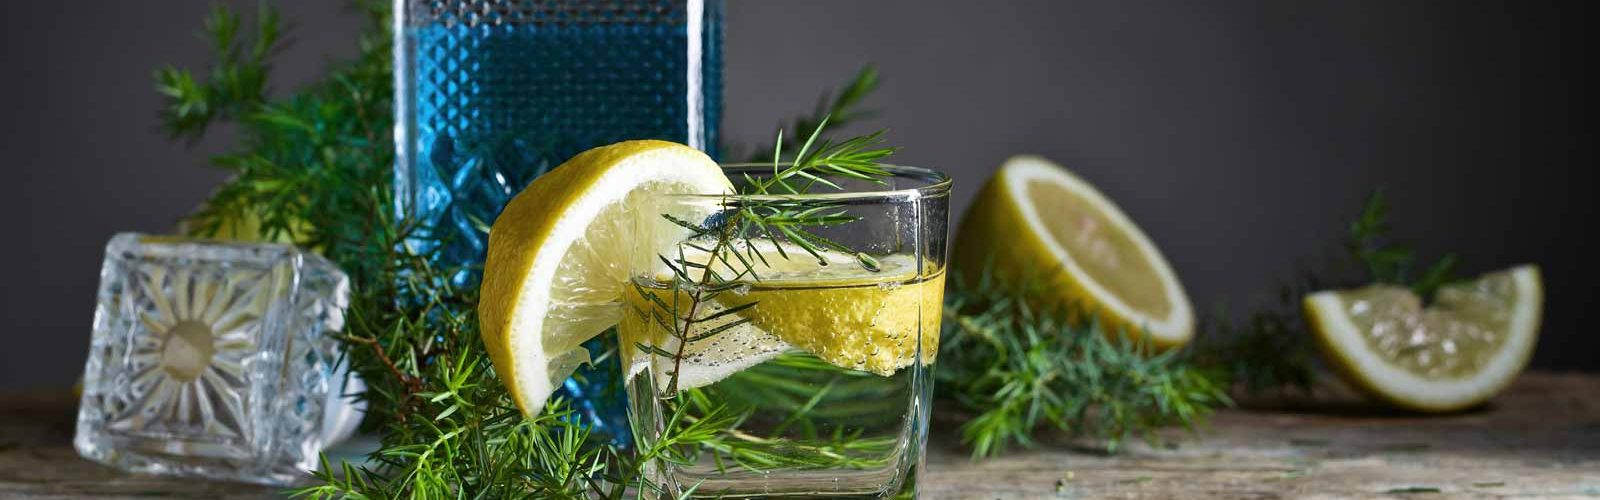 Gin and tonic with lemon